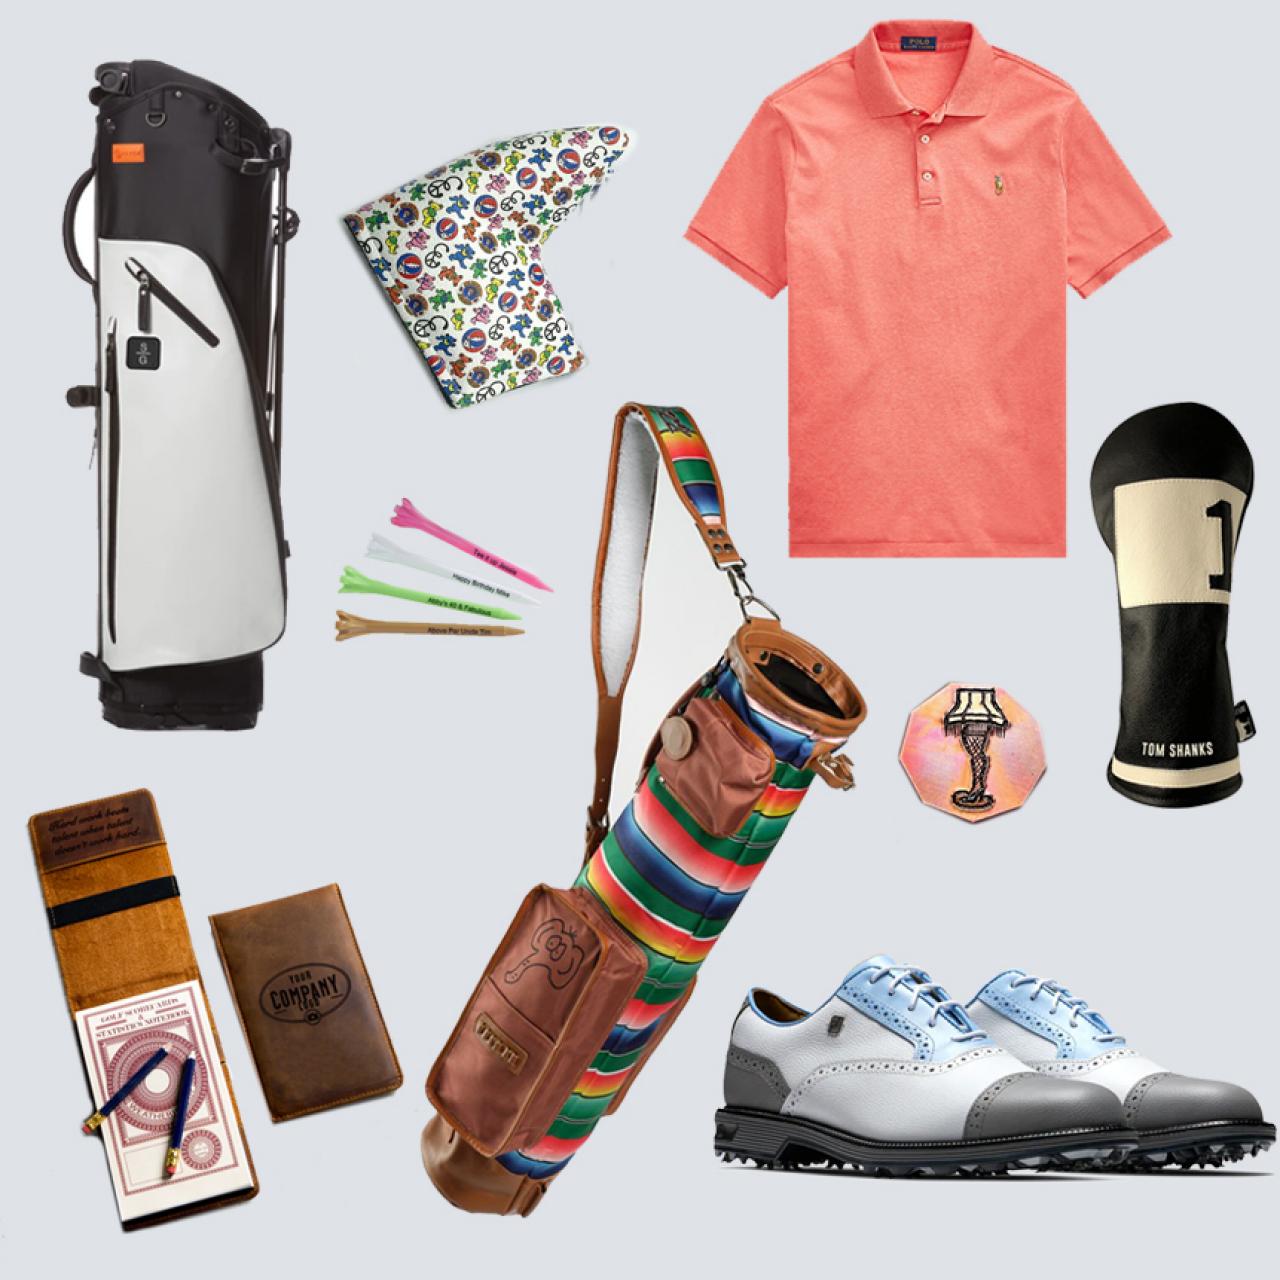 11 customizable gift ideas for golfers this holiday season, Golf  Equipment: Clubs, Balls, Bags